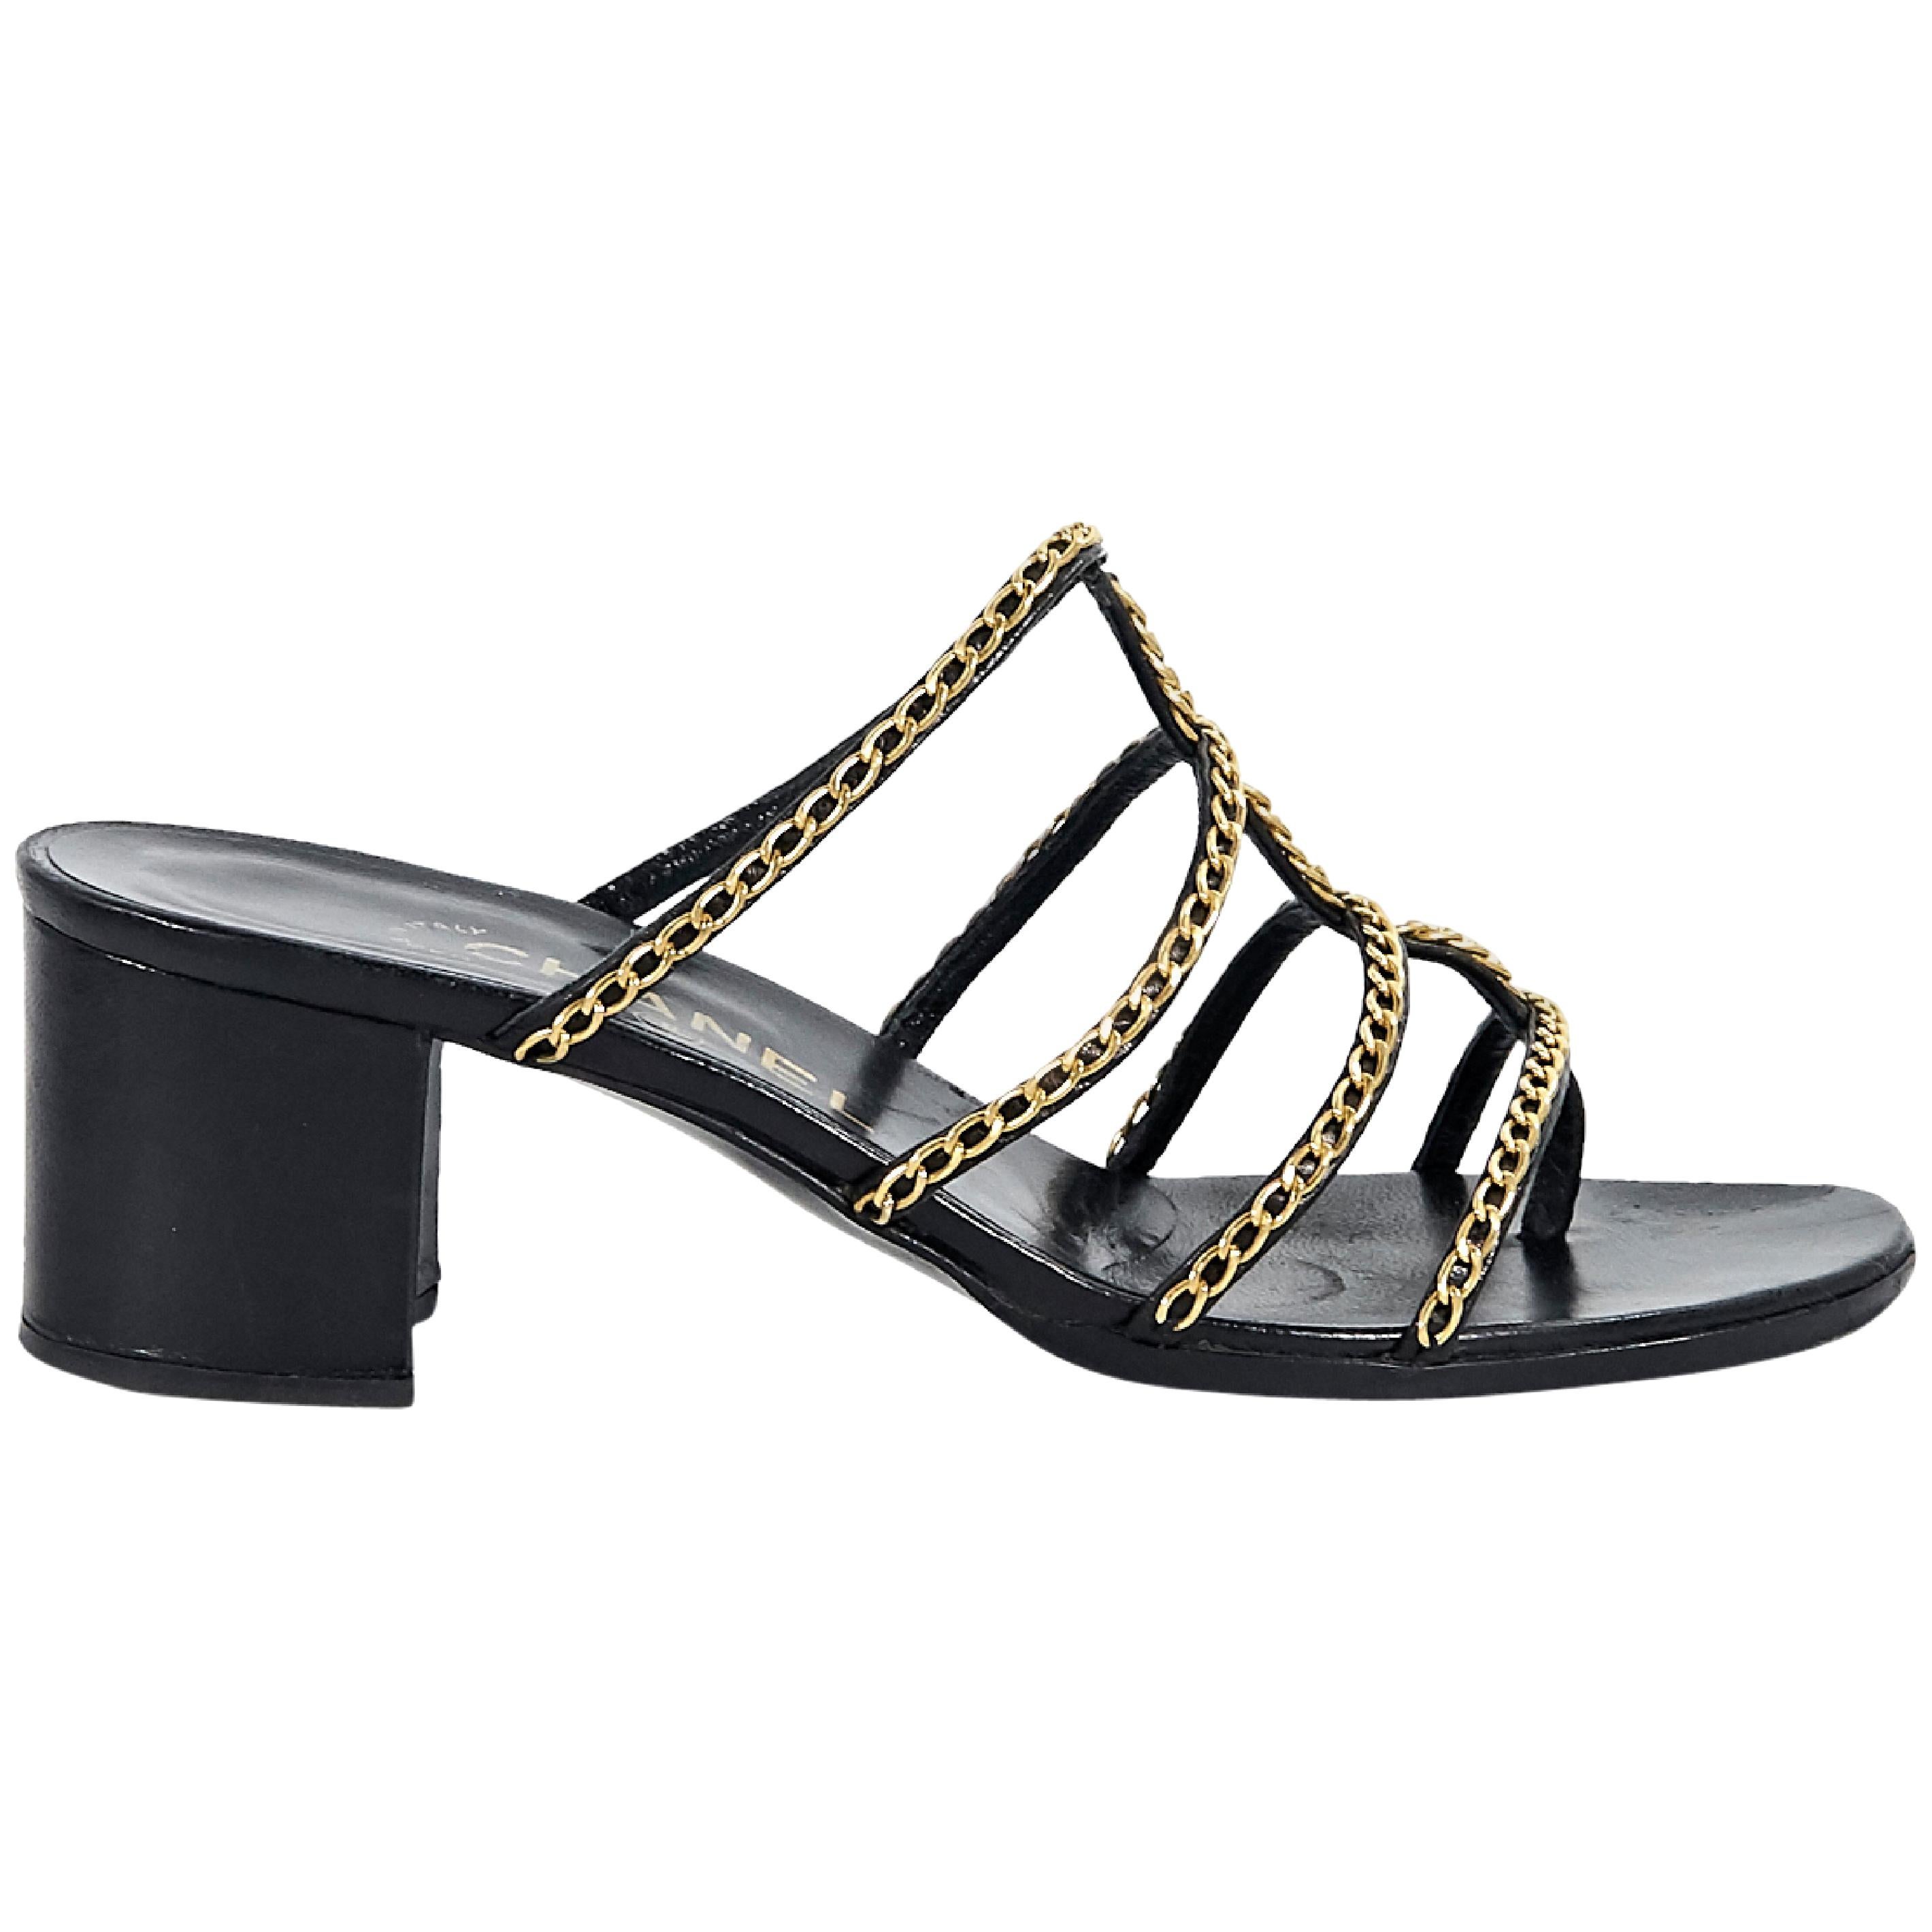 Black Chanel Chain-Trimmed Strappy Sandals